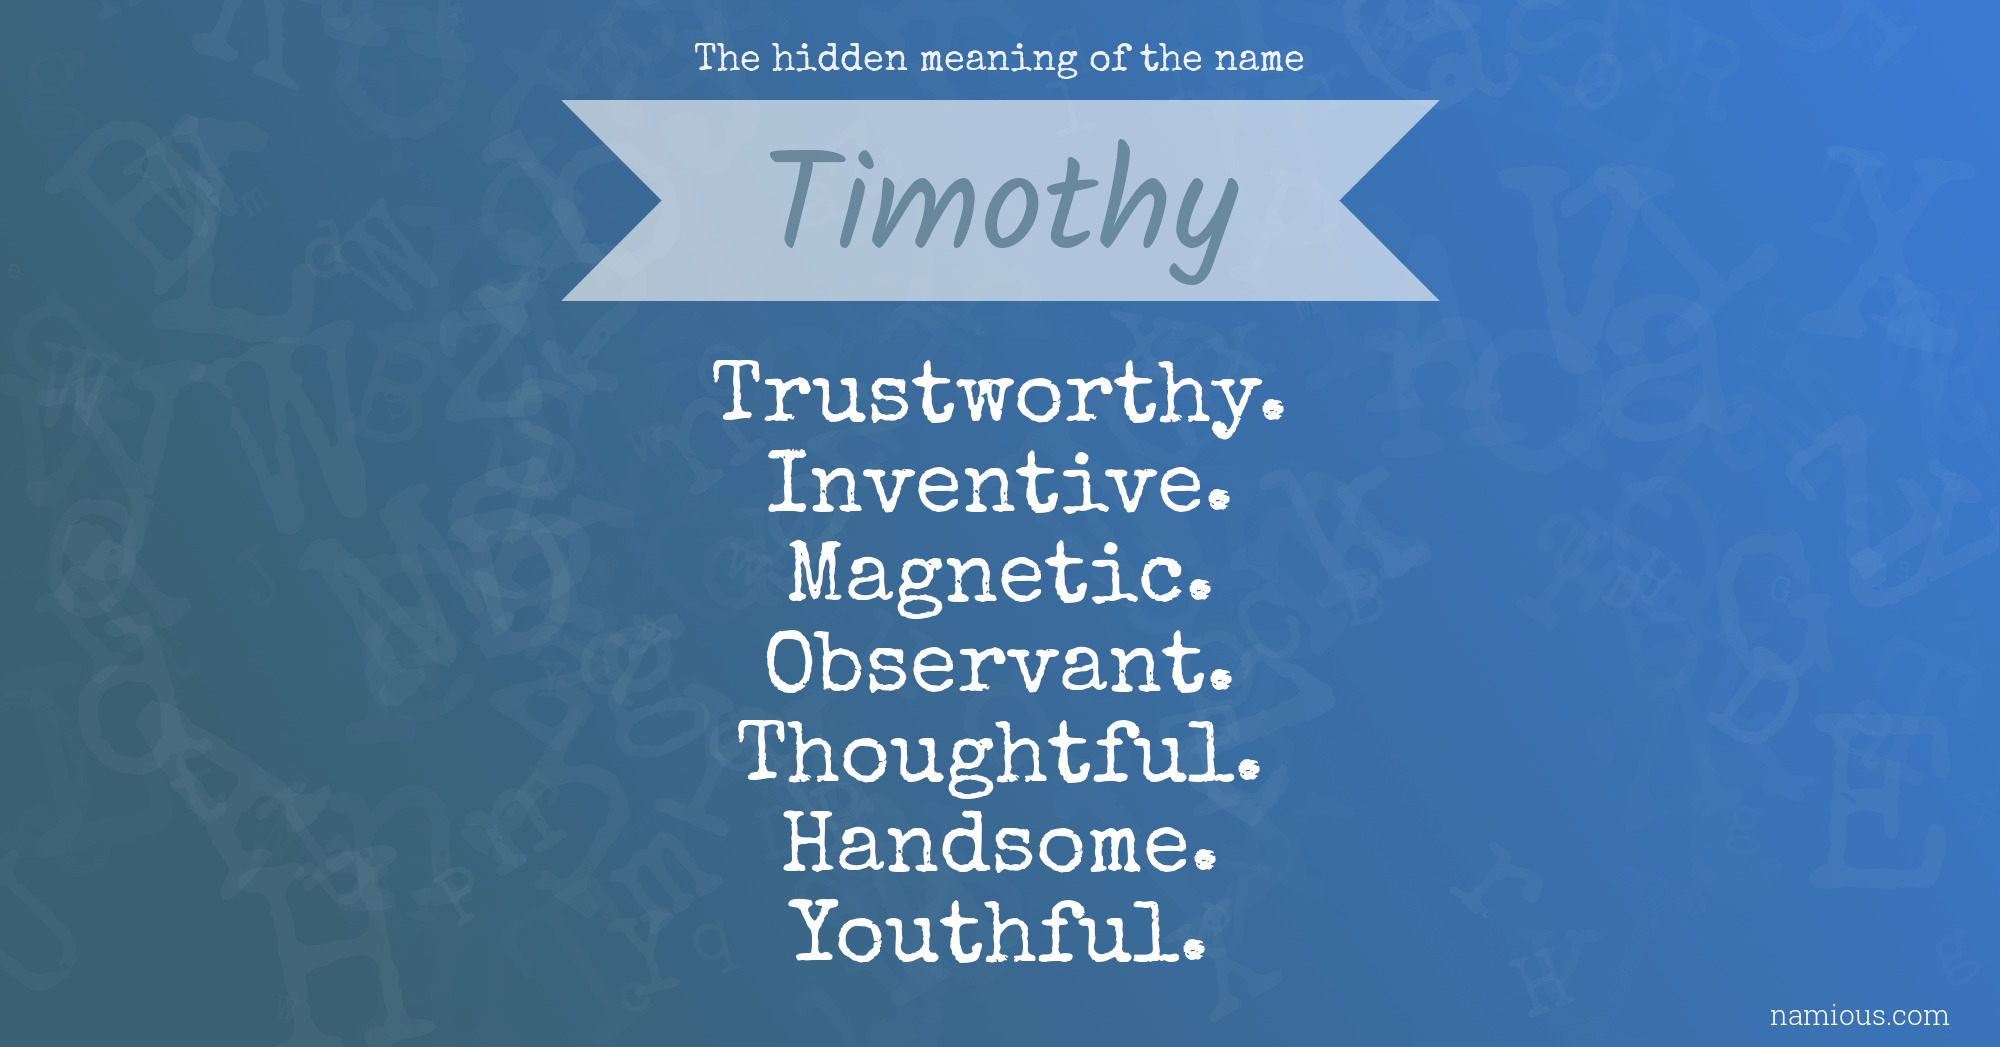 The hidden meaning of the name Timothy